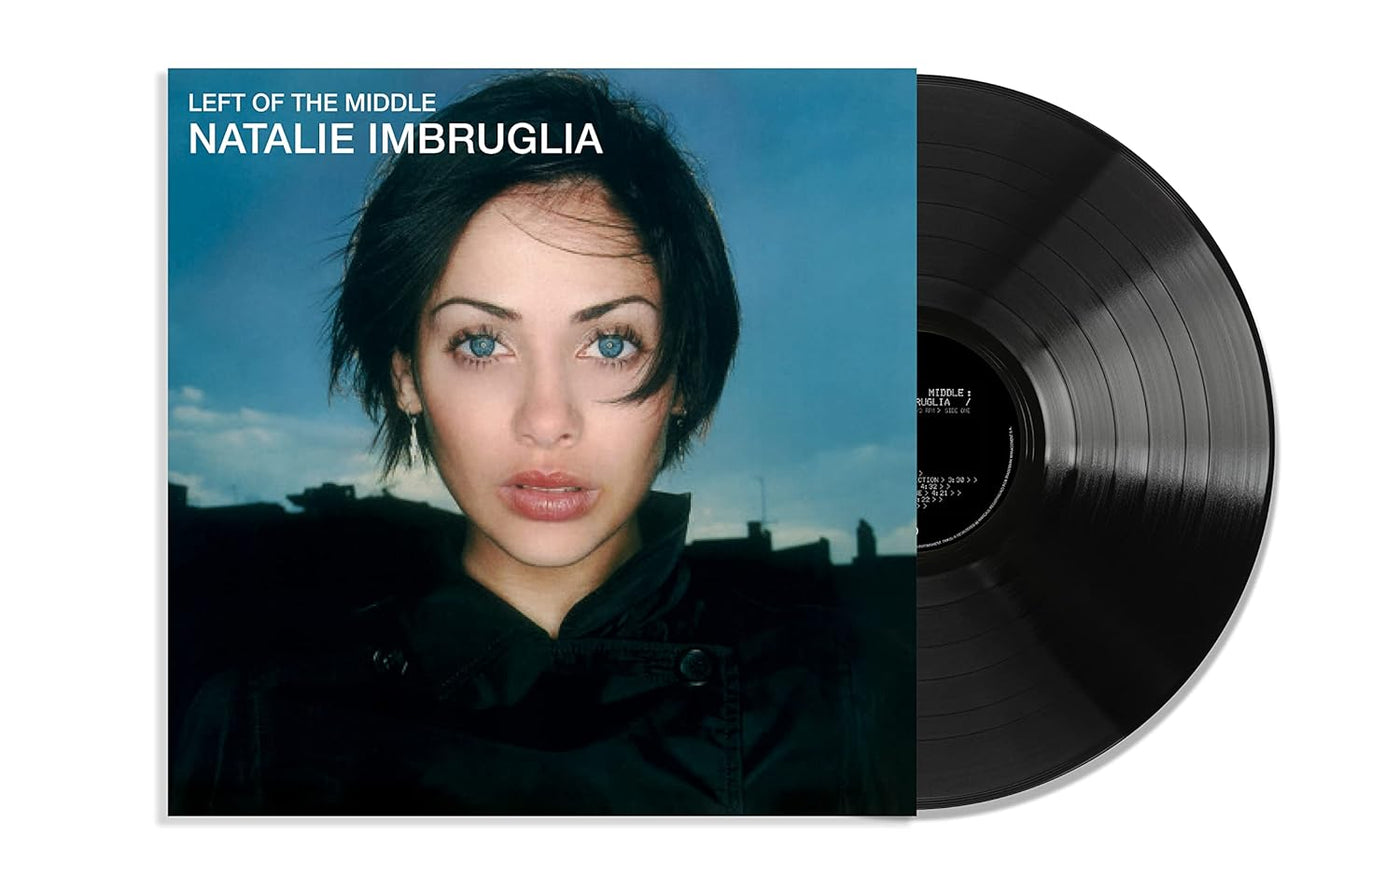 NEW/SEALED! Natalie Imbruglia - Left Of The Middle